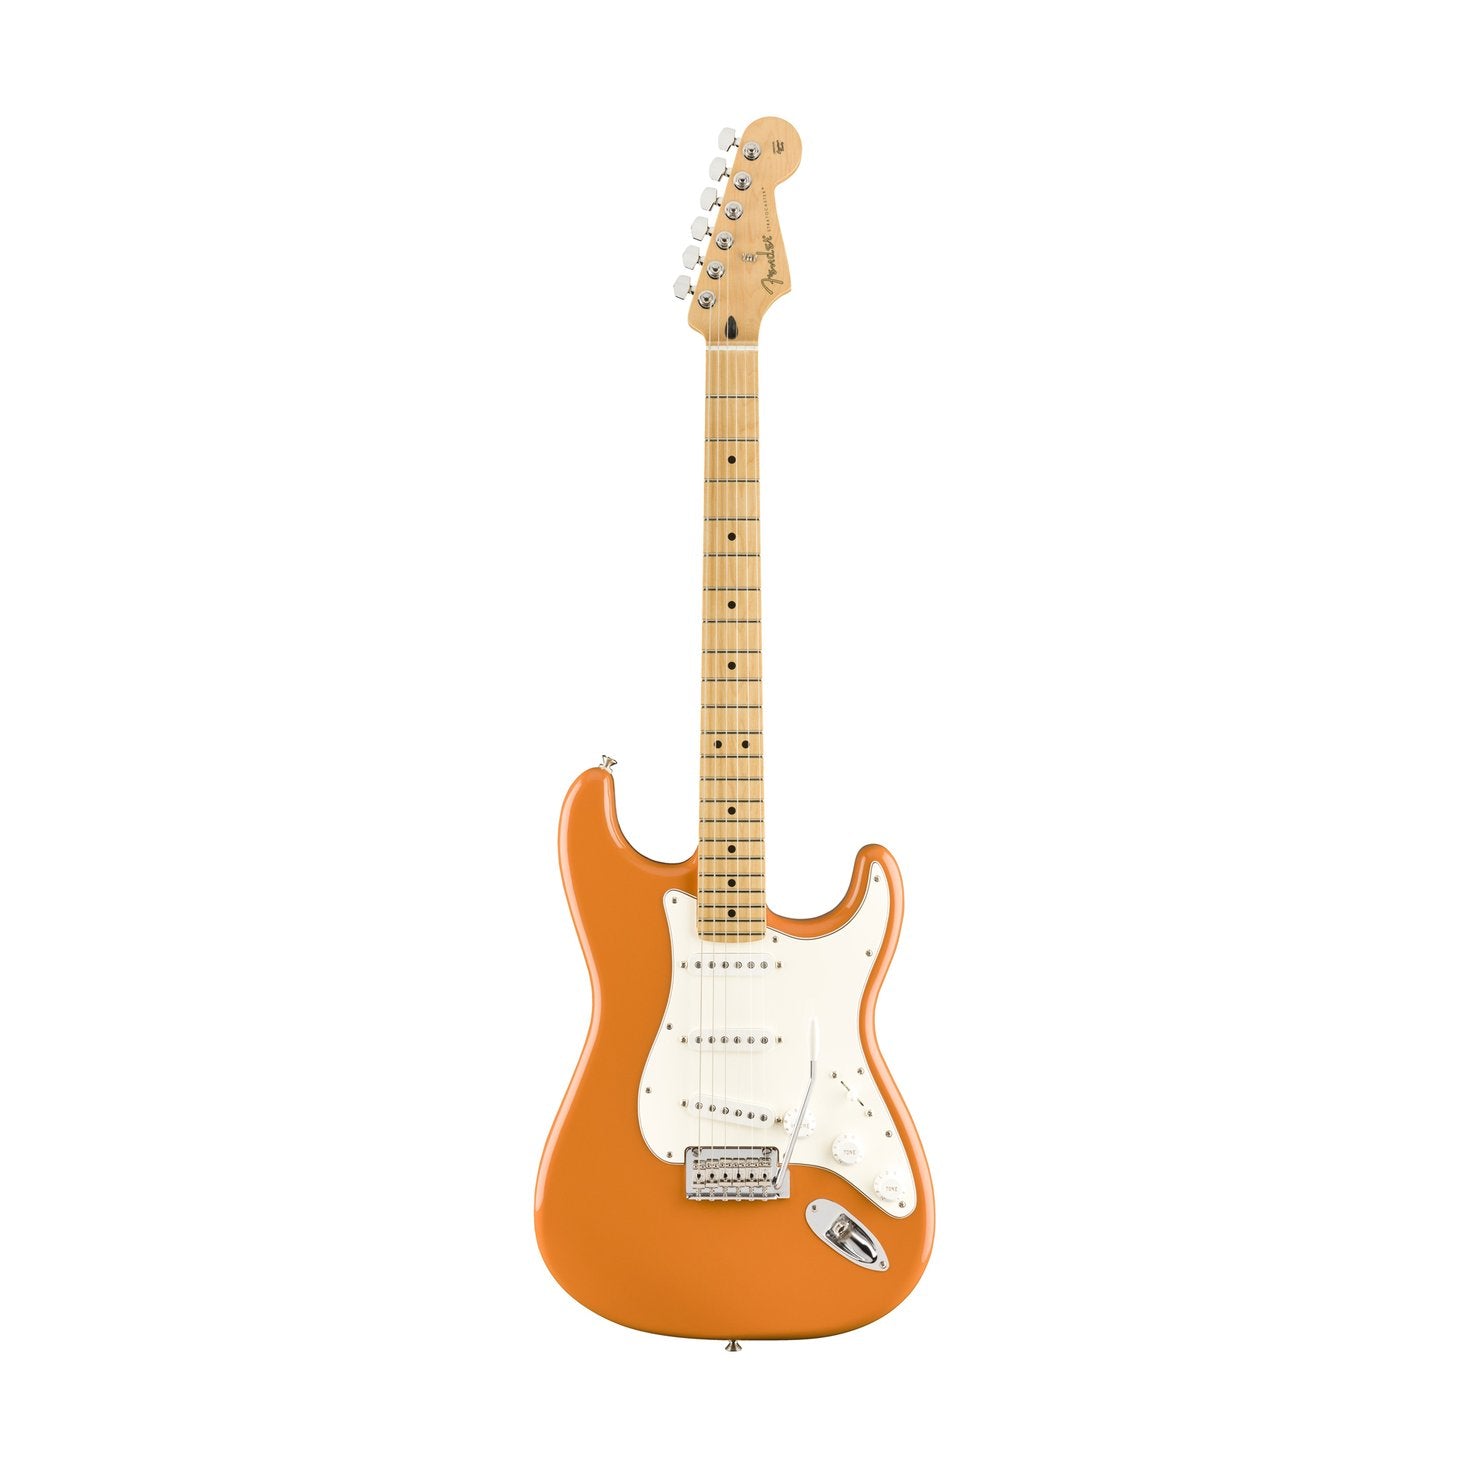 Fender Player Stratocaster Electric Guitar, Maple FB, Capri Orange, FENDER, ELECTRIC GUITAR, fender-eletric-guitar-f03-014-4502-582, ZOSO MUSIC SDN BHD